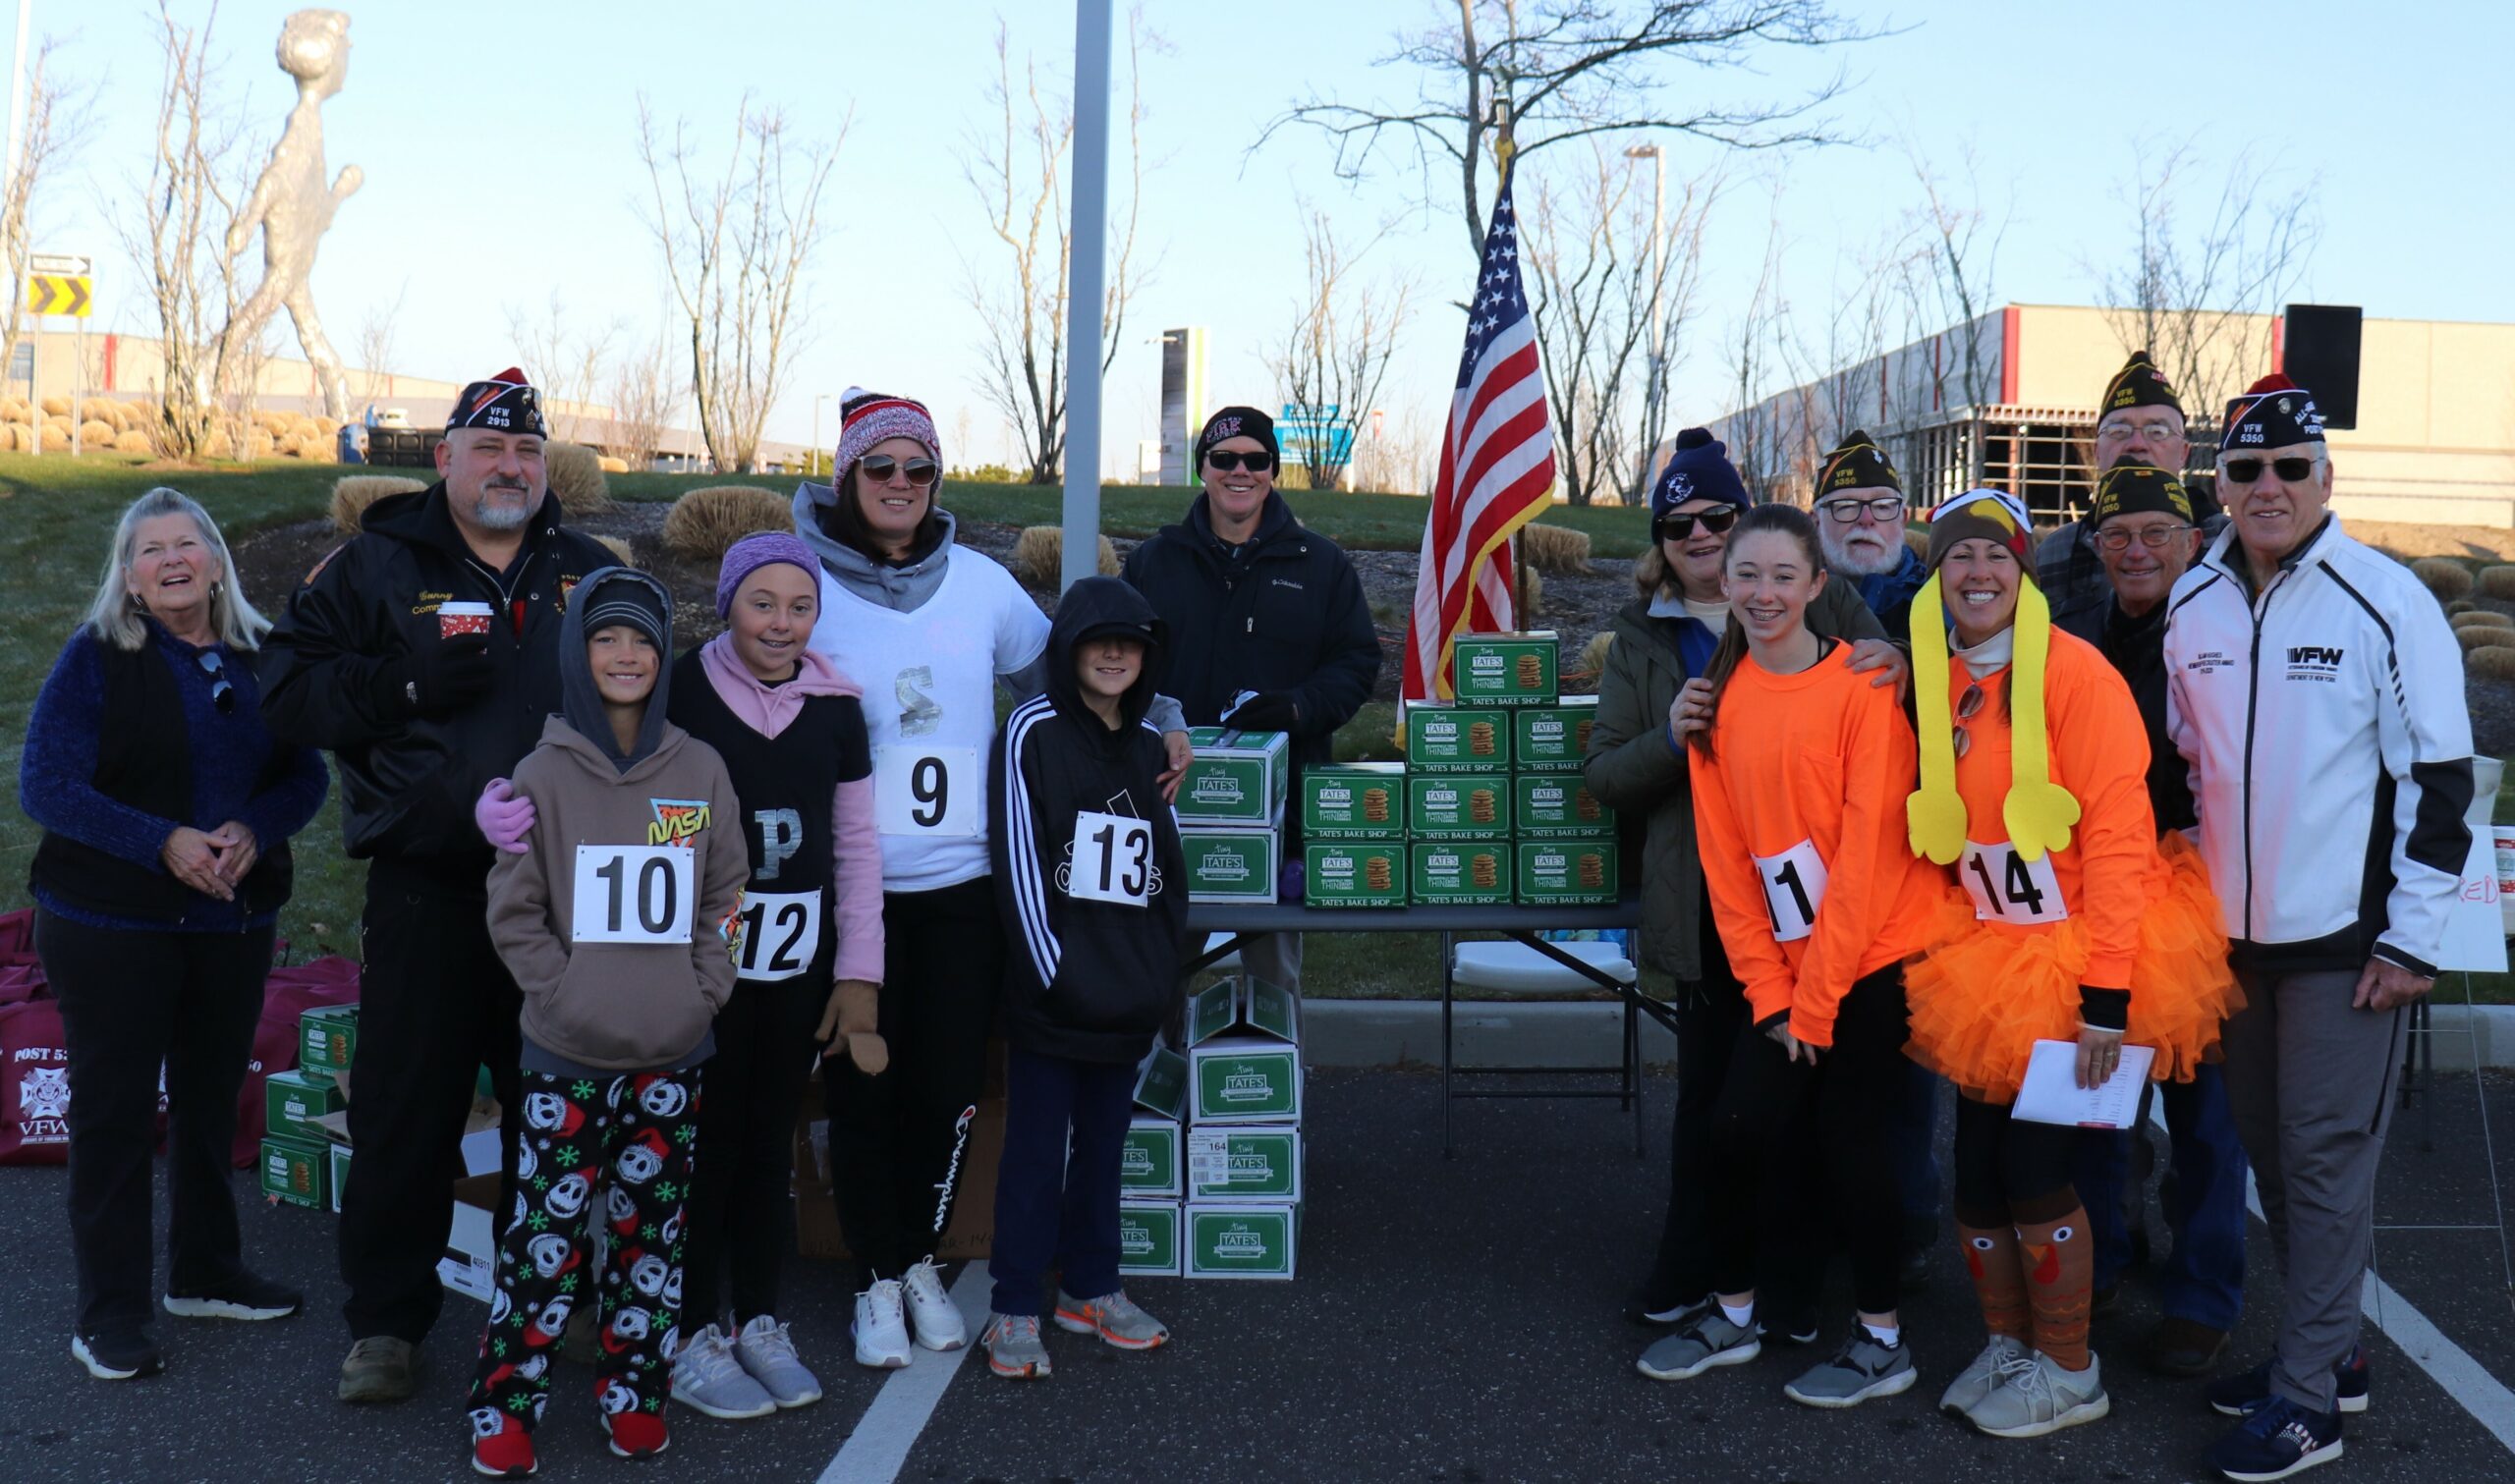 Raynor Country Day School students and staff joined forces with VFW 5350 for the annual VFW Westhampton Beach Turkey Trot.  In addition to joining the in-person event at the airbase on Thanksgiving morning, Raynor Country Day School also hosted an on-campus event leading up to the big day.  Prior to the Thanksgiving recess, students donated $5 in order to wear a 